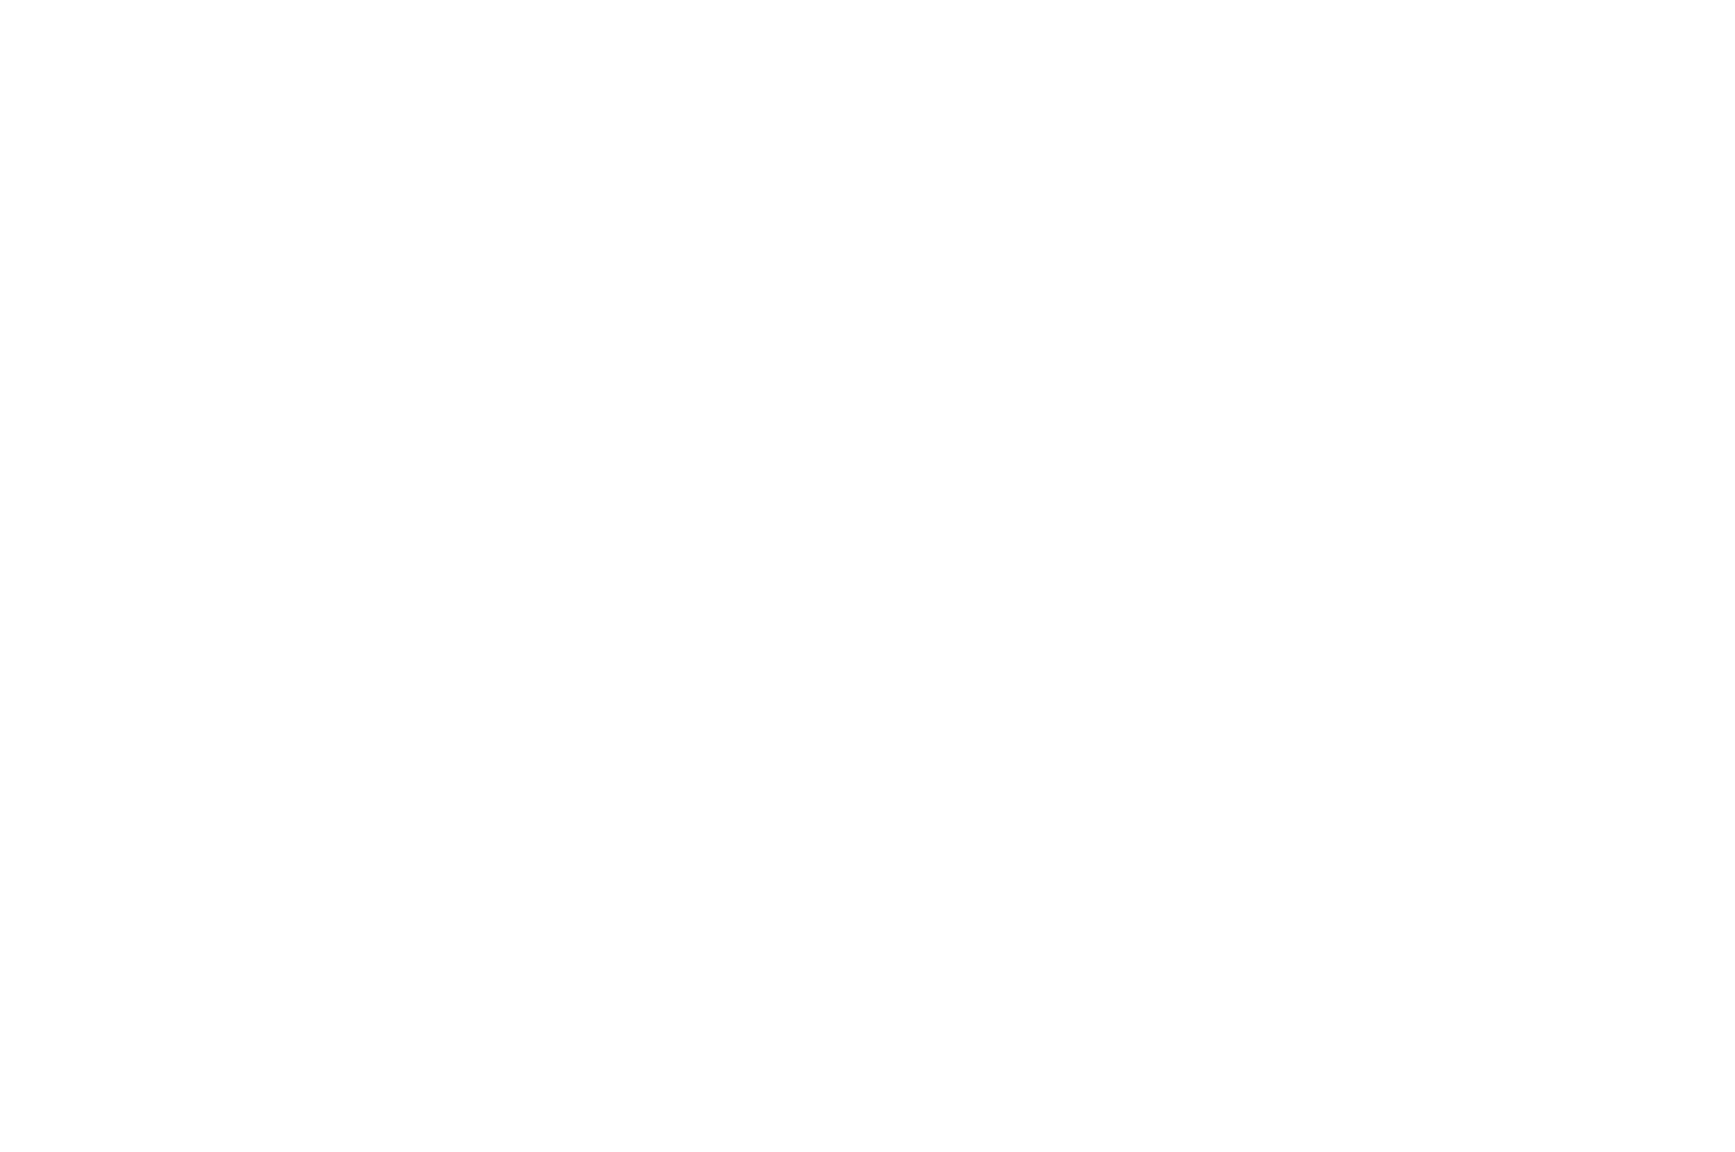 OFFICIAL SELECTION - New Jersey Film Festival - 2021 (1)